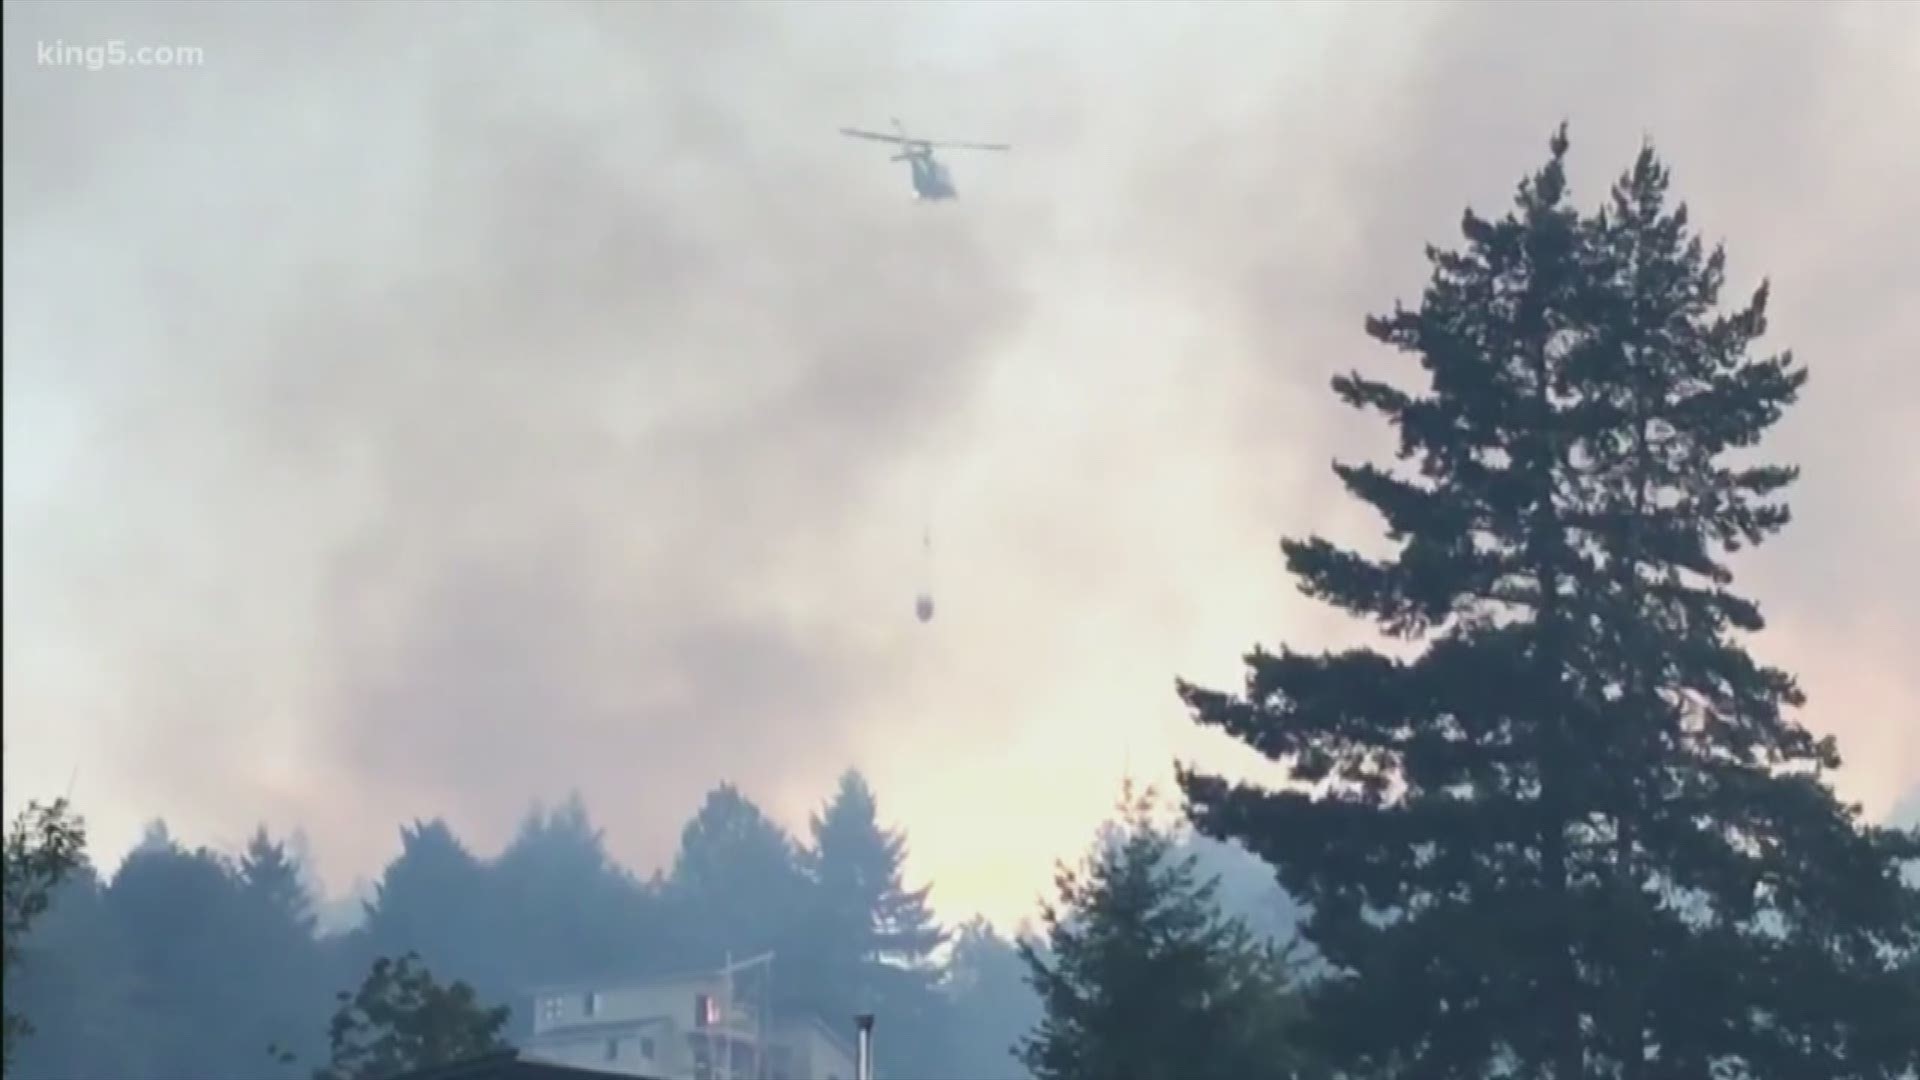 Homes were evacuated in Mason County as crews battled a five-acre fire Thursday night. Officials said the Union Bank fire was moving uphill from Highway 106 in the town of Union. About 20-30 homes were in the evacuation zone.